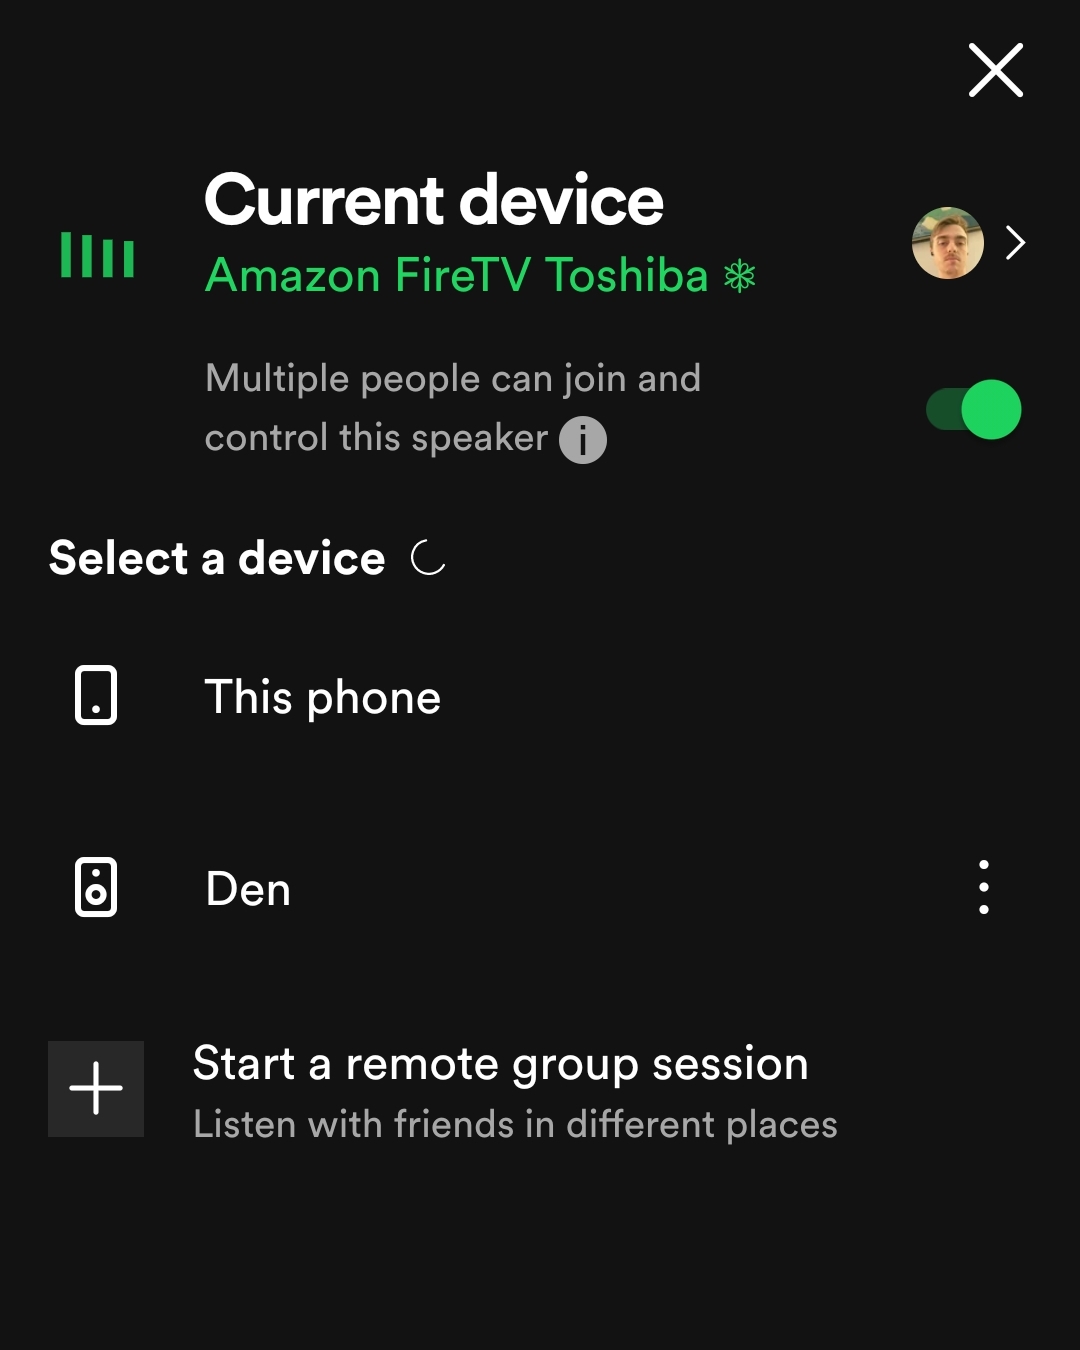 Bare overfyldt Det Bangladesh How to Chromecast Spotify: Set up and troubleshooting - Android Authority